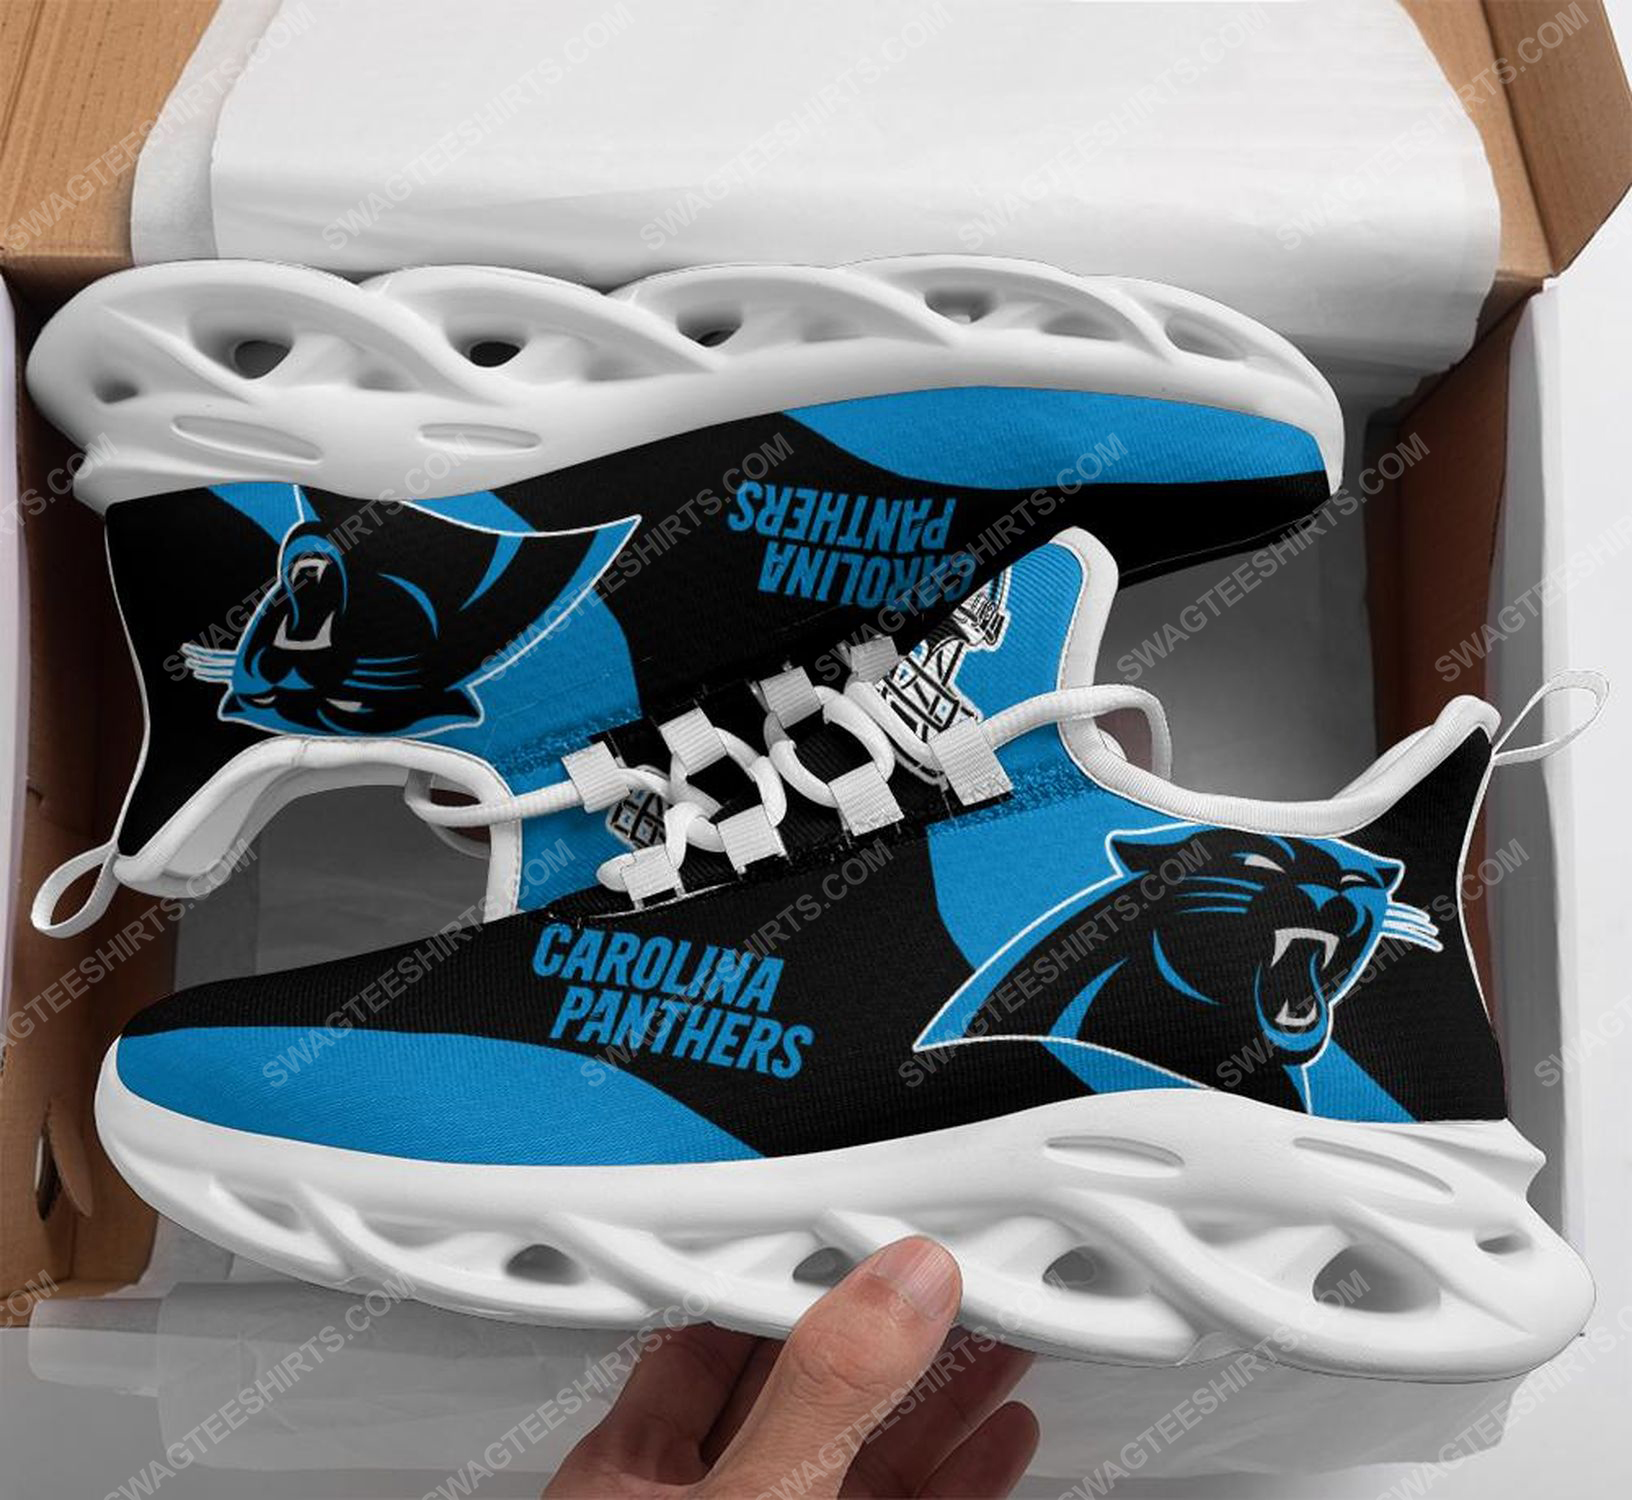 [special edition] The carolina panthers football team max soul shoes – Maria